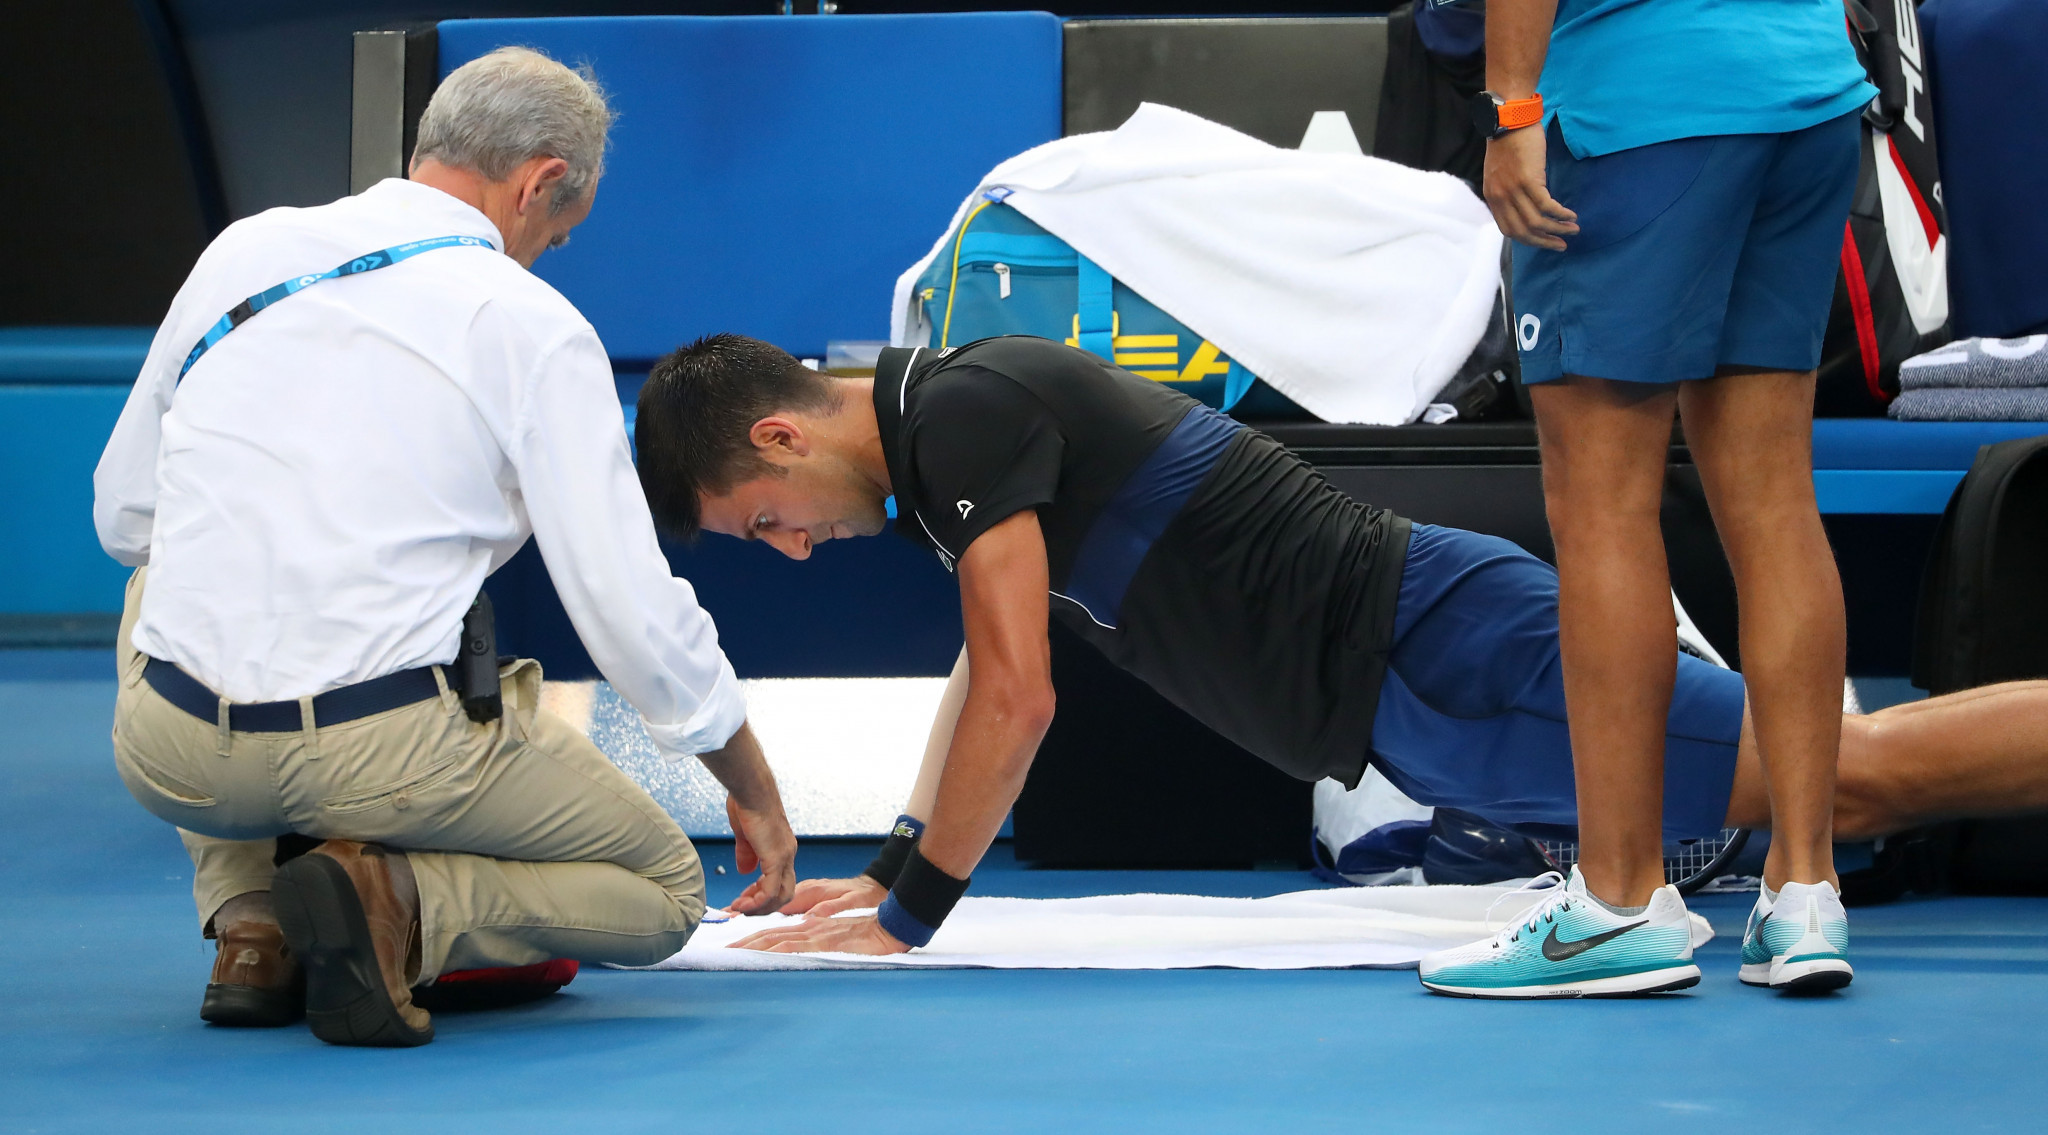 Novak Djokovic underwent treatment for an injury during his third round win today ©Getty Images